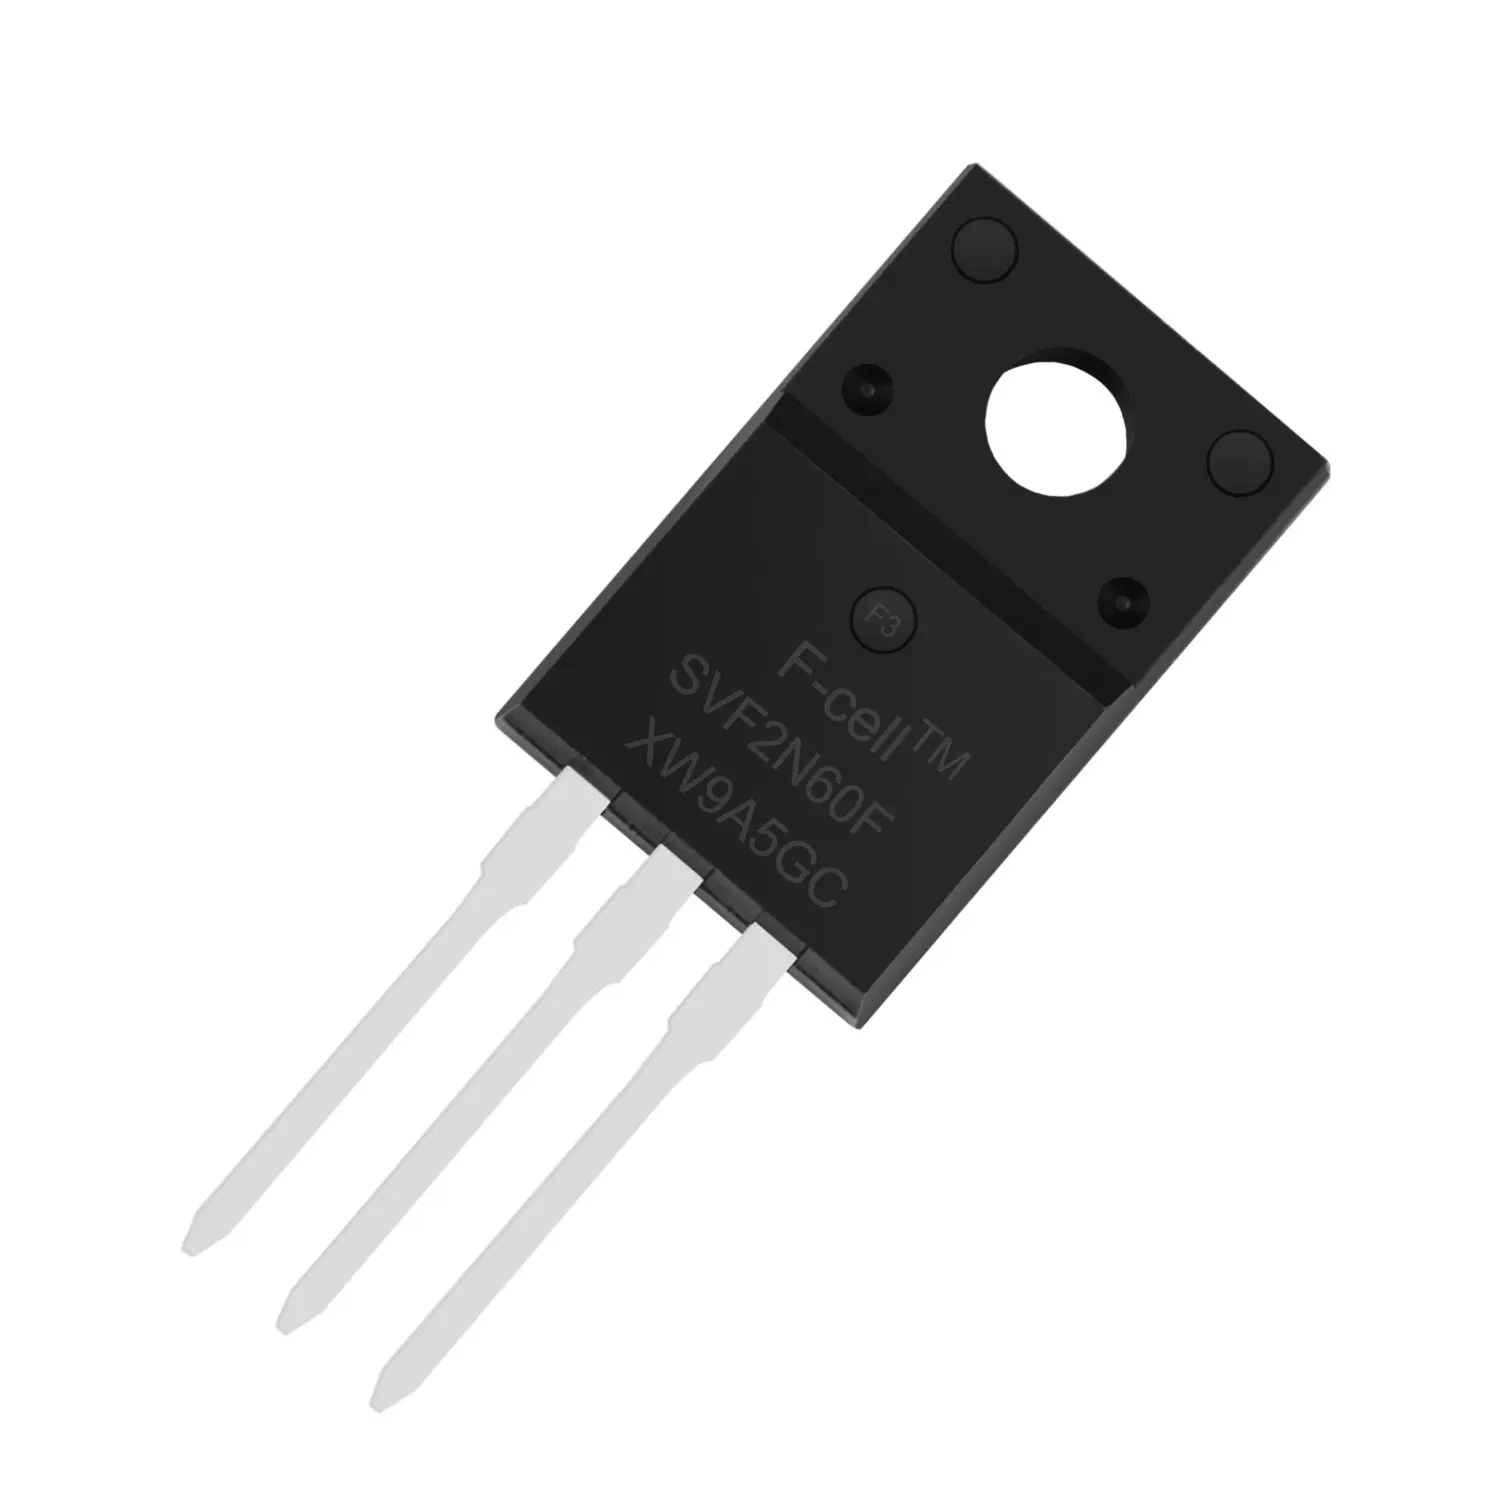 Todiys New 10Pcs for FQPF20N60 FQPF20N60C 20N60C FQPF-20N60 20A TO-220F N-Channel MOSFET IR Power Transistor IC FQPF-20N60C 